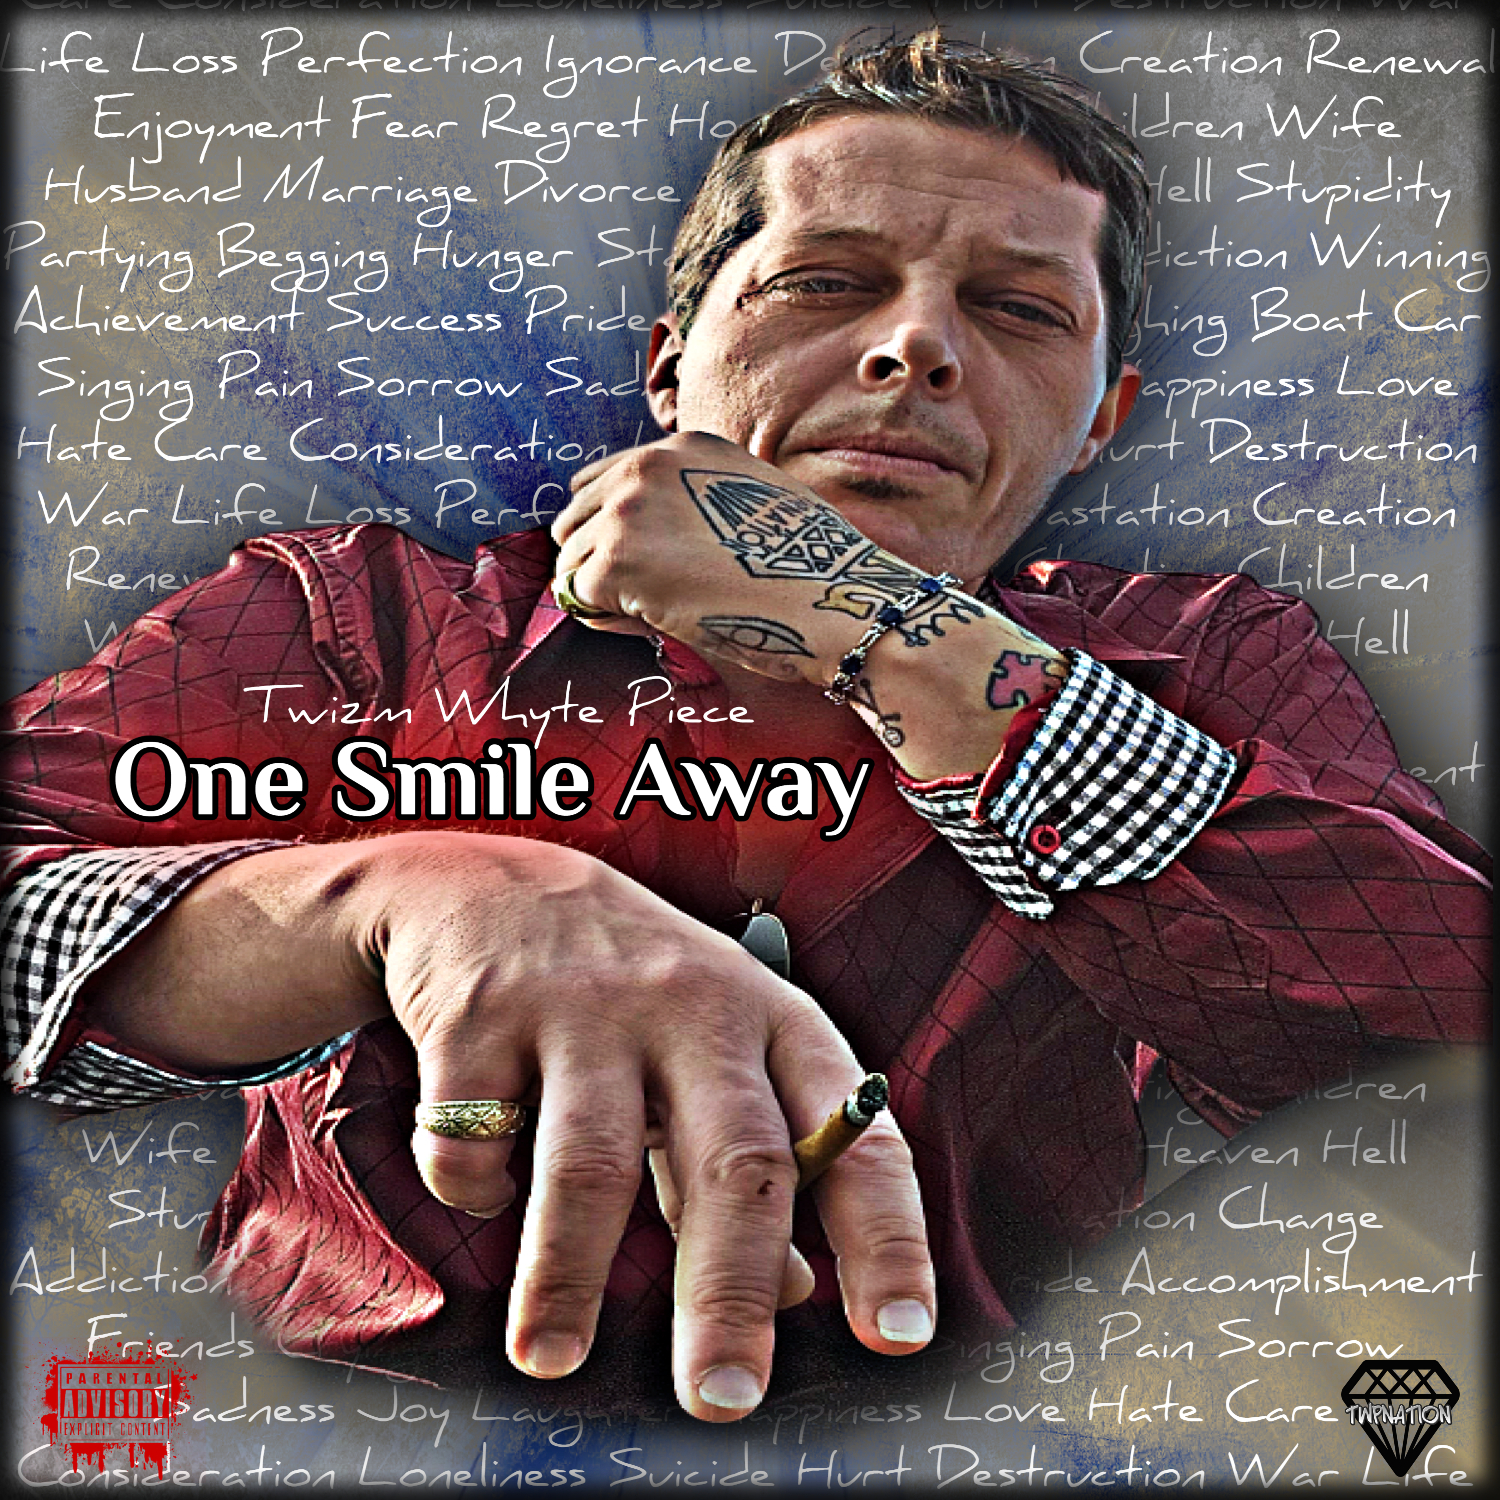 Twizm Whyte Piece To Release Highly Anticipated New Album "One Smile Away" On Monday, January 29th, 2024 